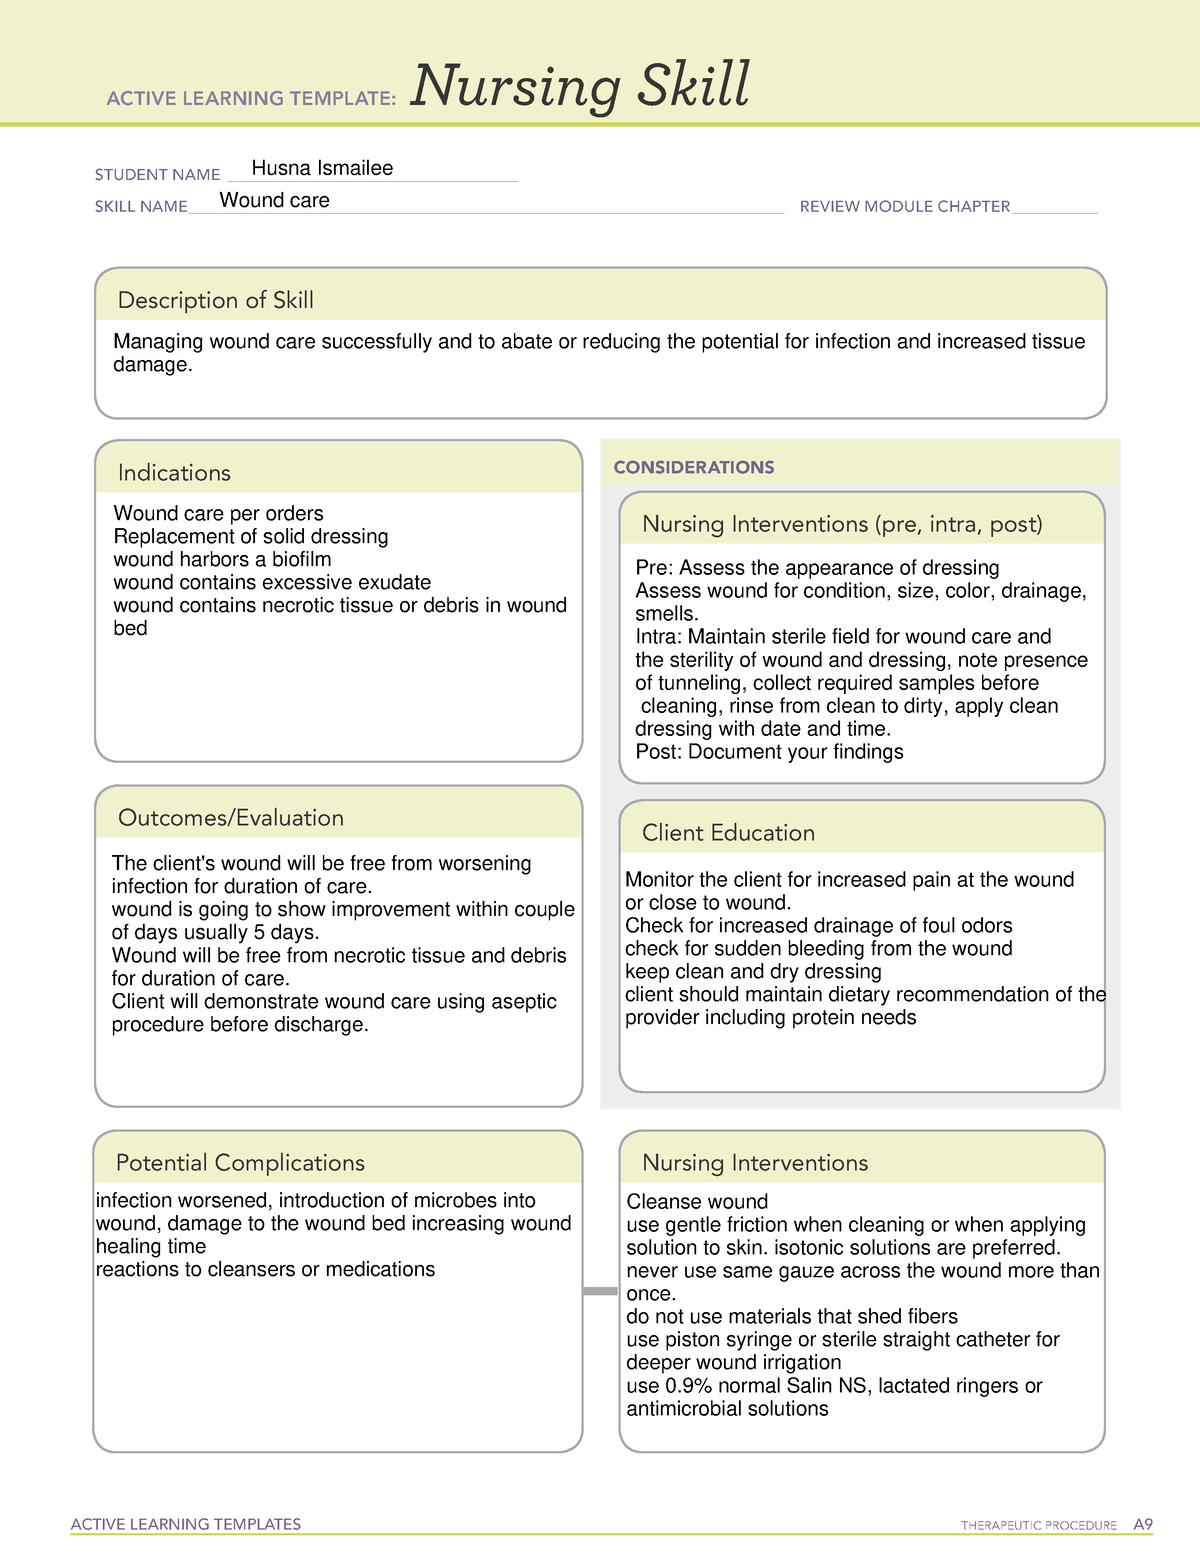 active-learning-template-nursing-skill-wound-active-learning